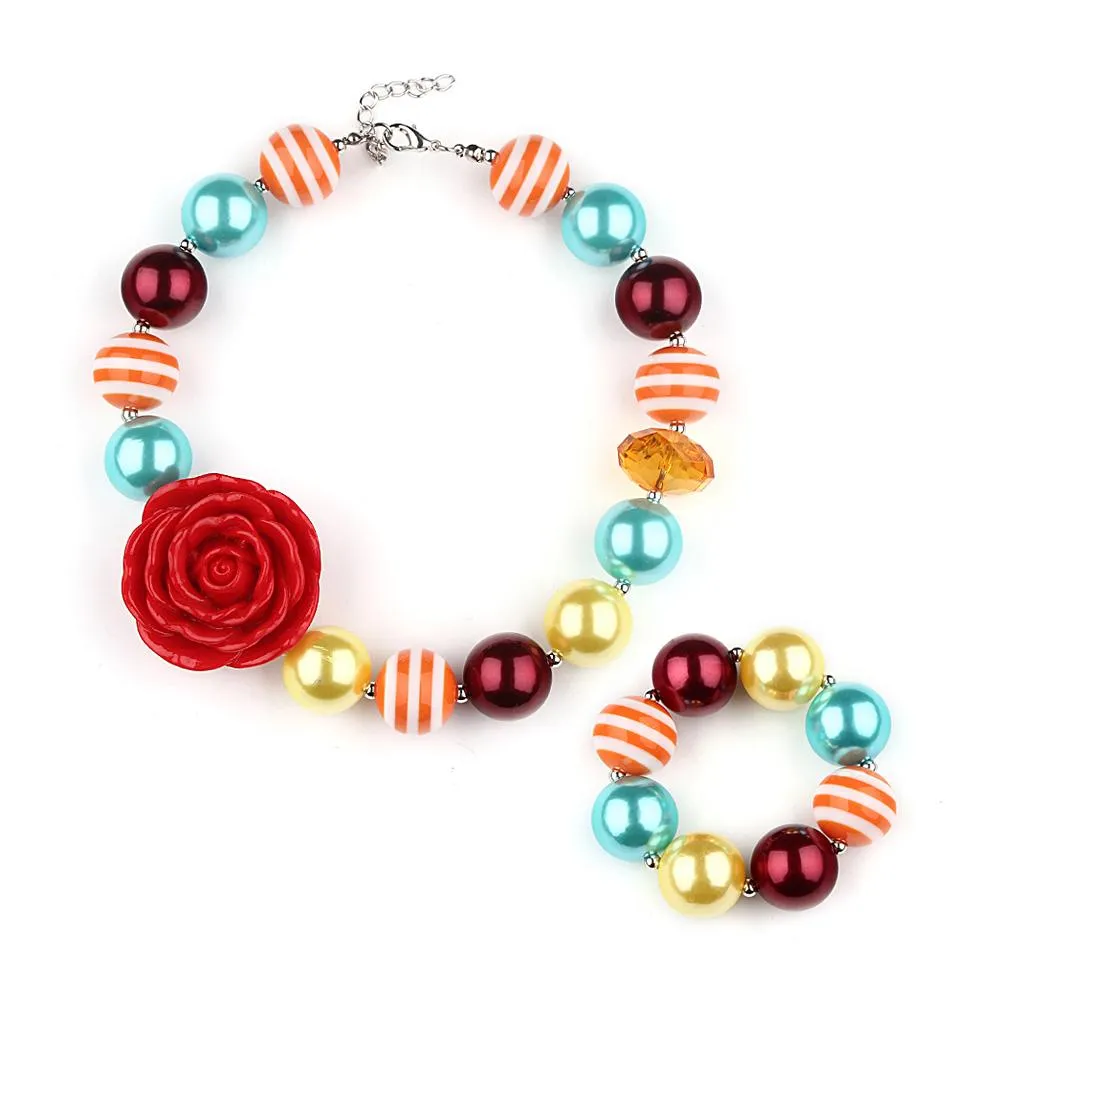 Bohemian Children Girls Color Beads Necklace And Bracelet Kit Red ...